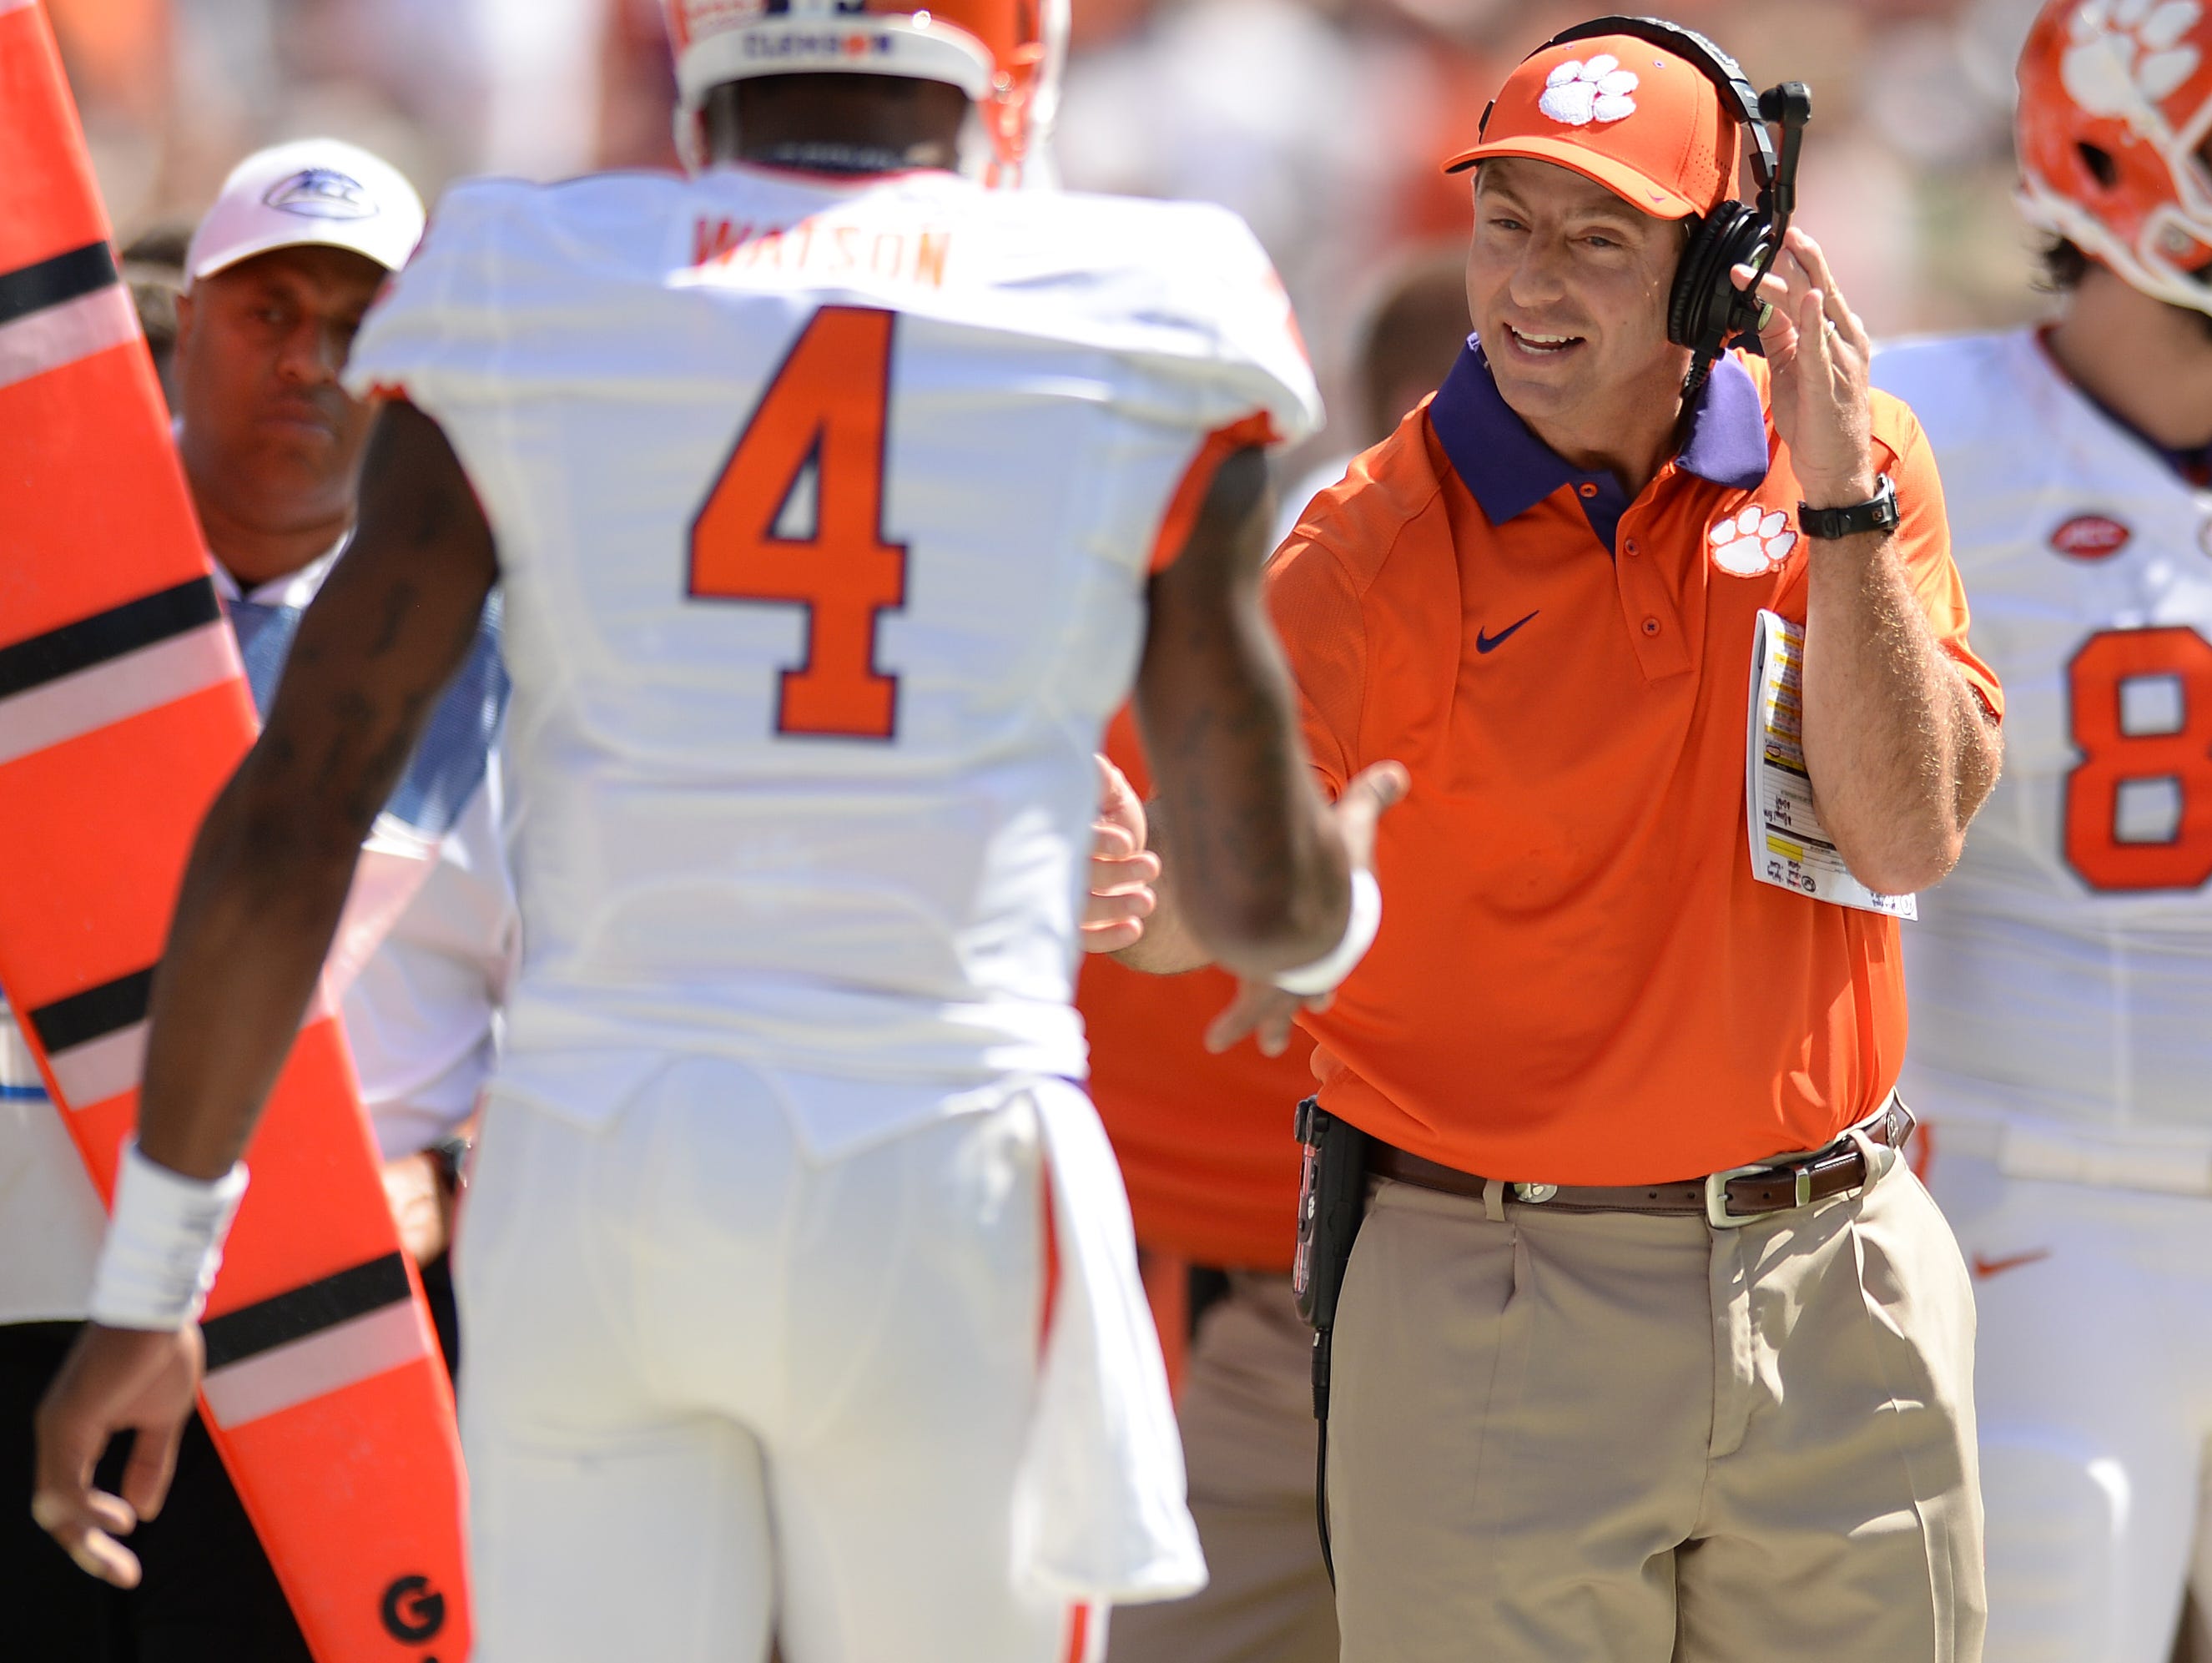 Clemson head coach Dabo Swinney is all smiles after quarterback Deshaun Watson (4) connected with tight end Jordan Leggett (16) for a TD against Miami during the 1st quarter Saturday, Oct. 24, 2015, in Miami Gardens, Fla.